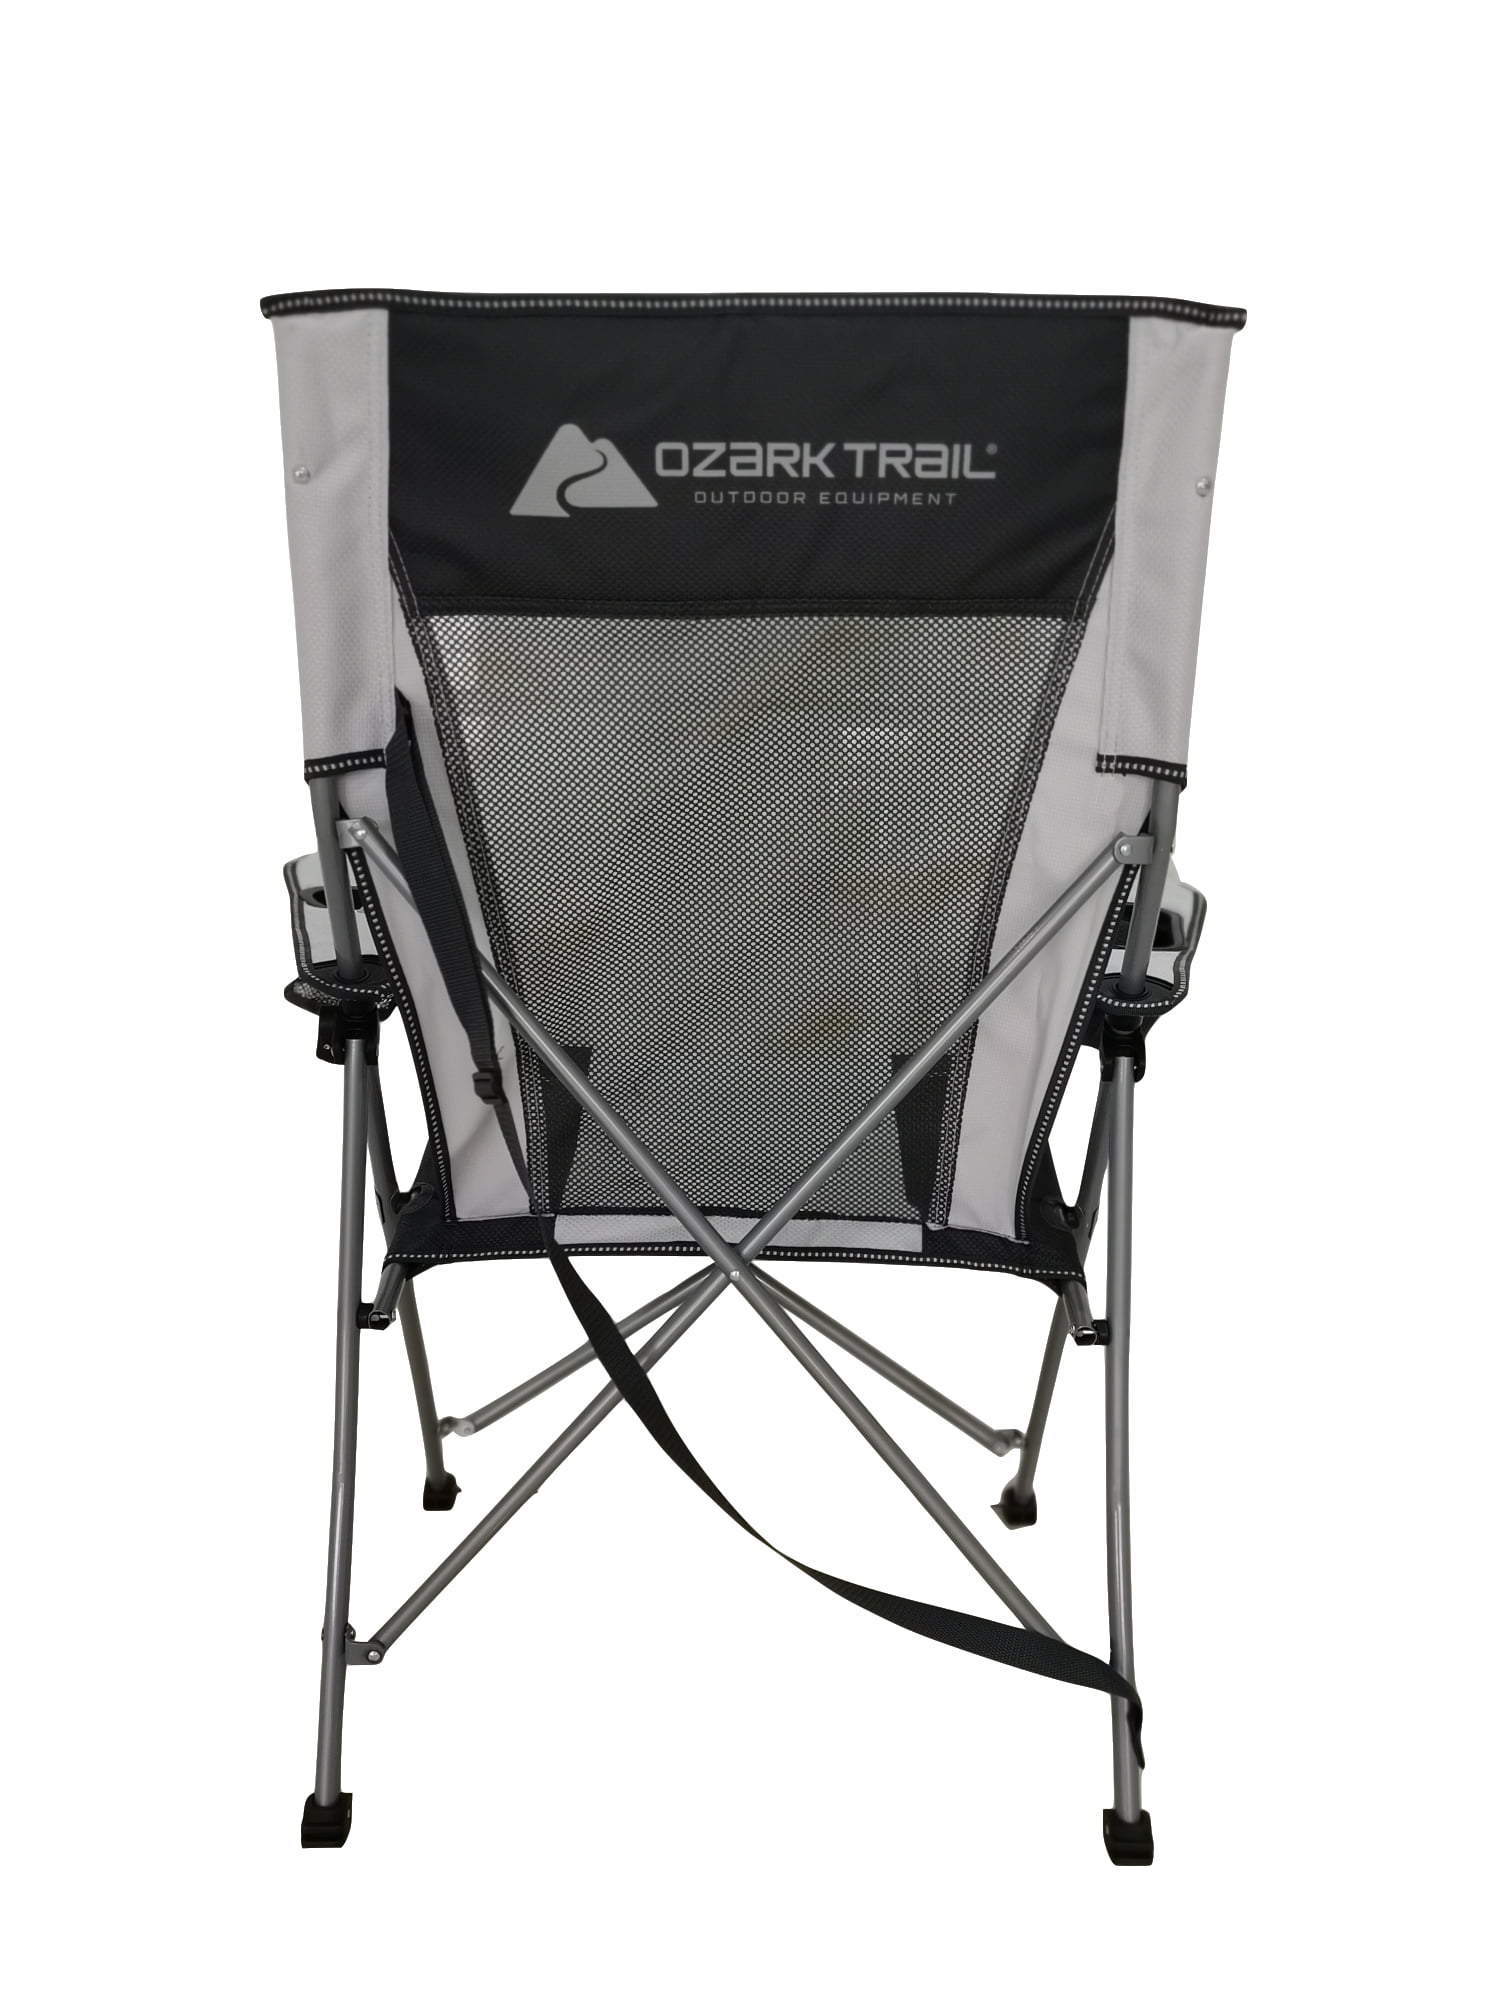 OZARK TRAIL CAMP ROCKING CHAIR Outdoor Portable Tension Camp Seat Furniture New 